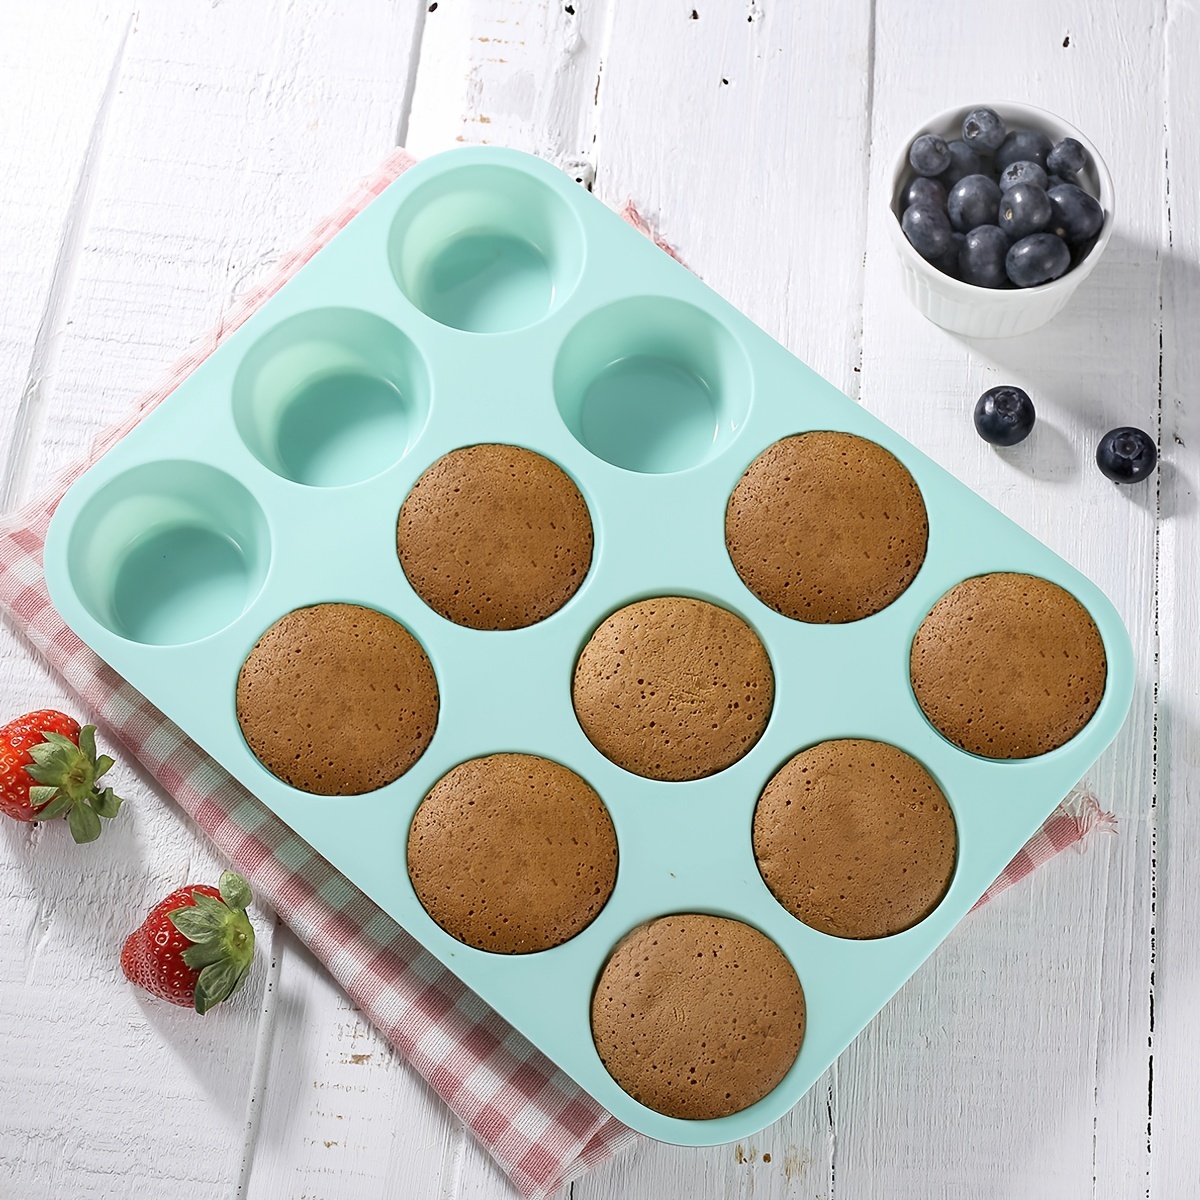 24 Cavities Silicone Muffin Top Pans Non-Stick Round Mini Tart Pan for Egg  Sandwiches - China Silicone Muffin Top Pans and Muffin Top Pans price